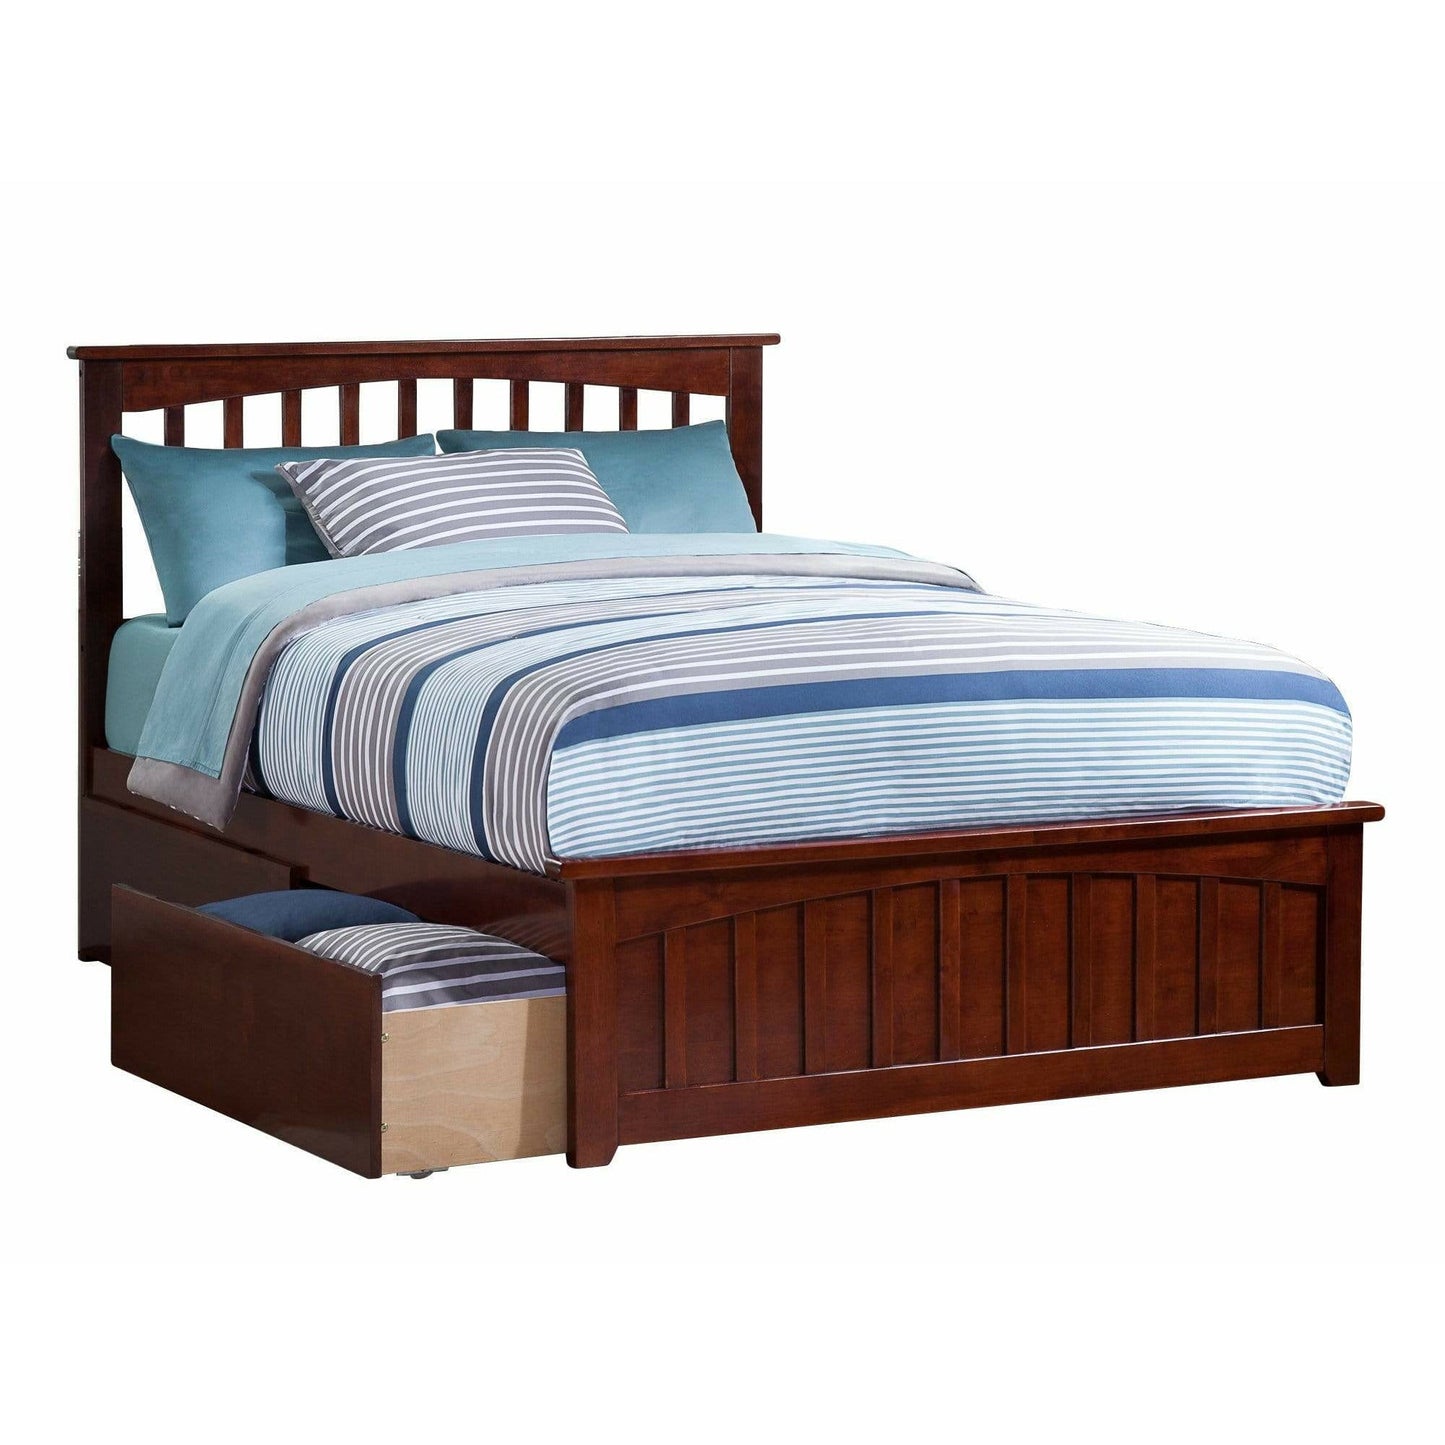 Atlantic Furniture Bed Mission Full Platform Bed with Matching Foot Board with 2 Urban Bed Drawers in Espresso